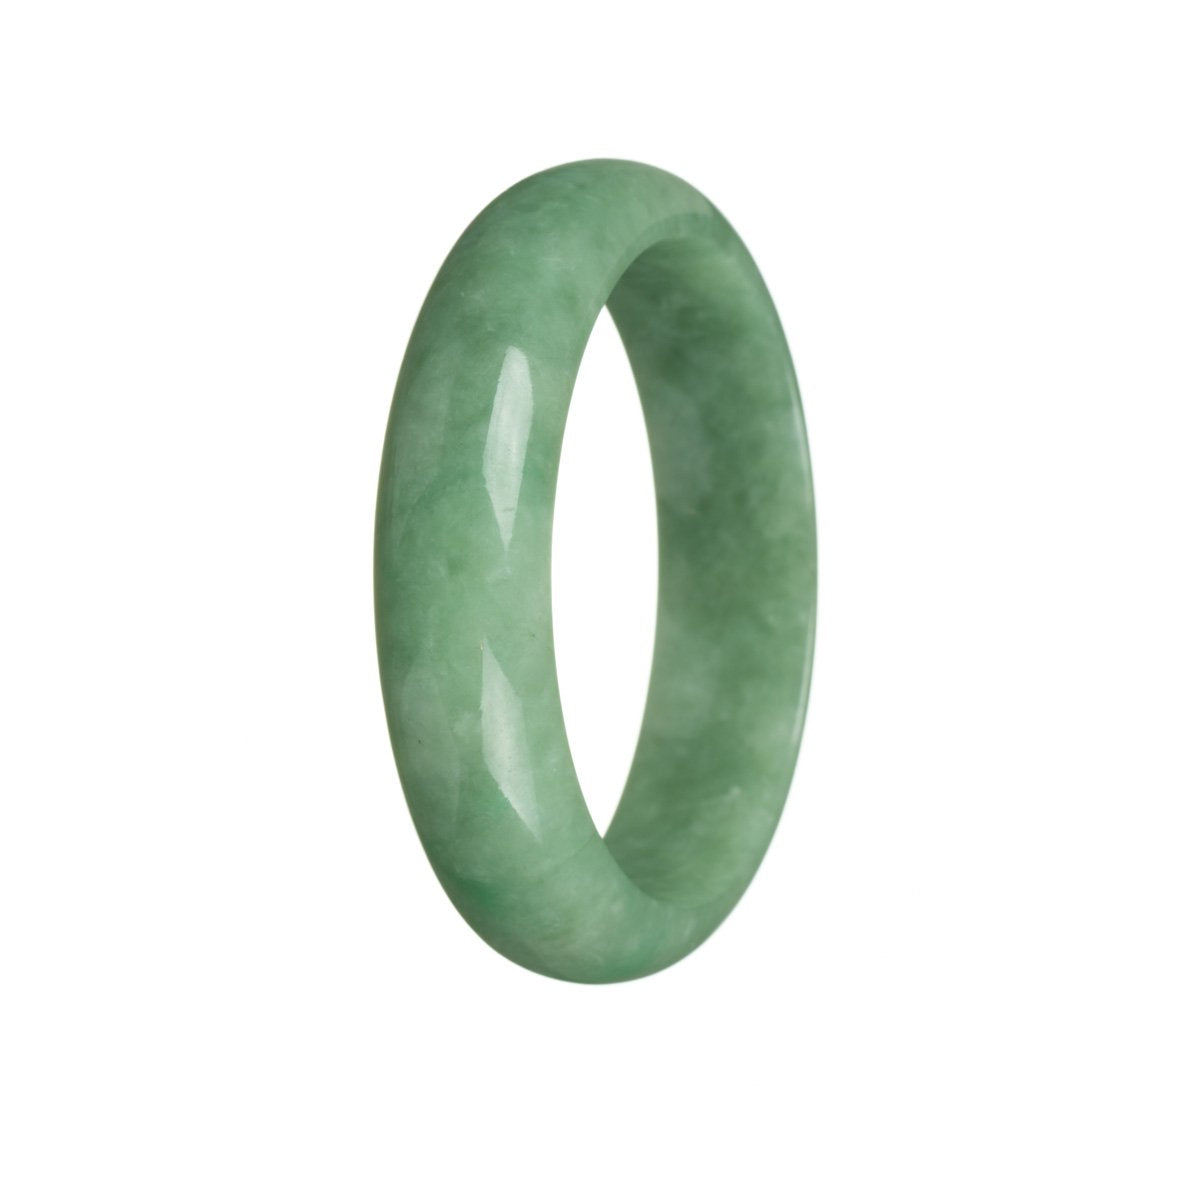 A close-up photo of a beautiful green jade bracelet with a half-moon shape, originating from Burma. The bracelet is made of genuine untreated jade, showcasing its natural beauty.